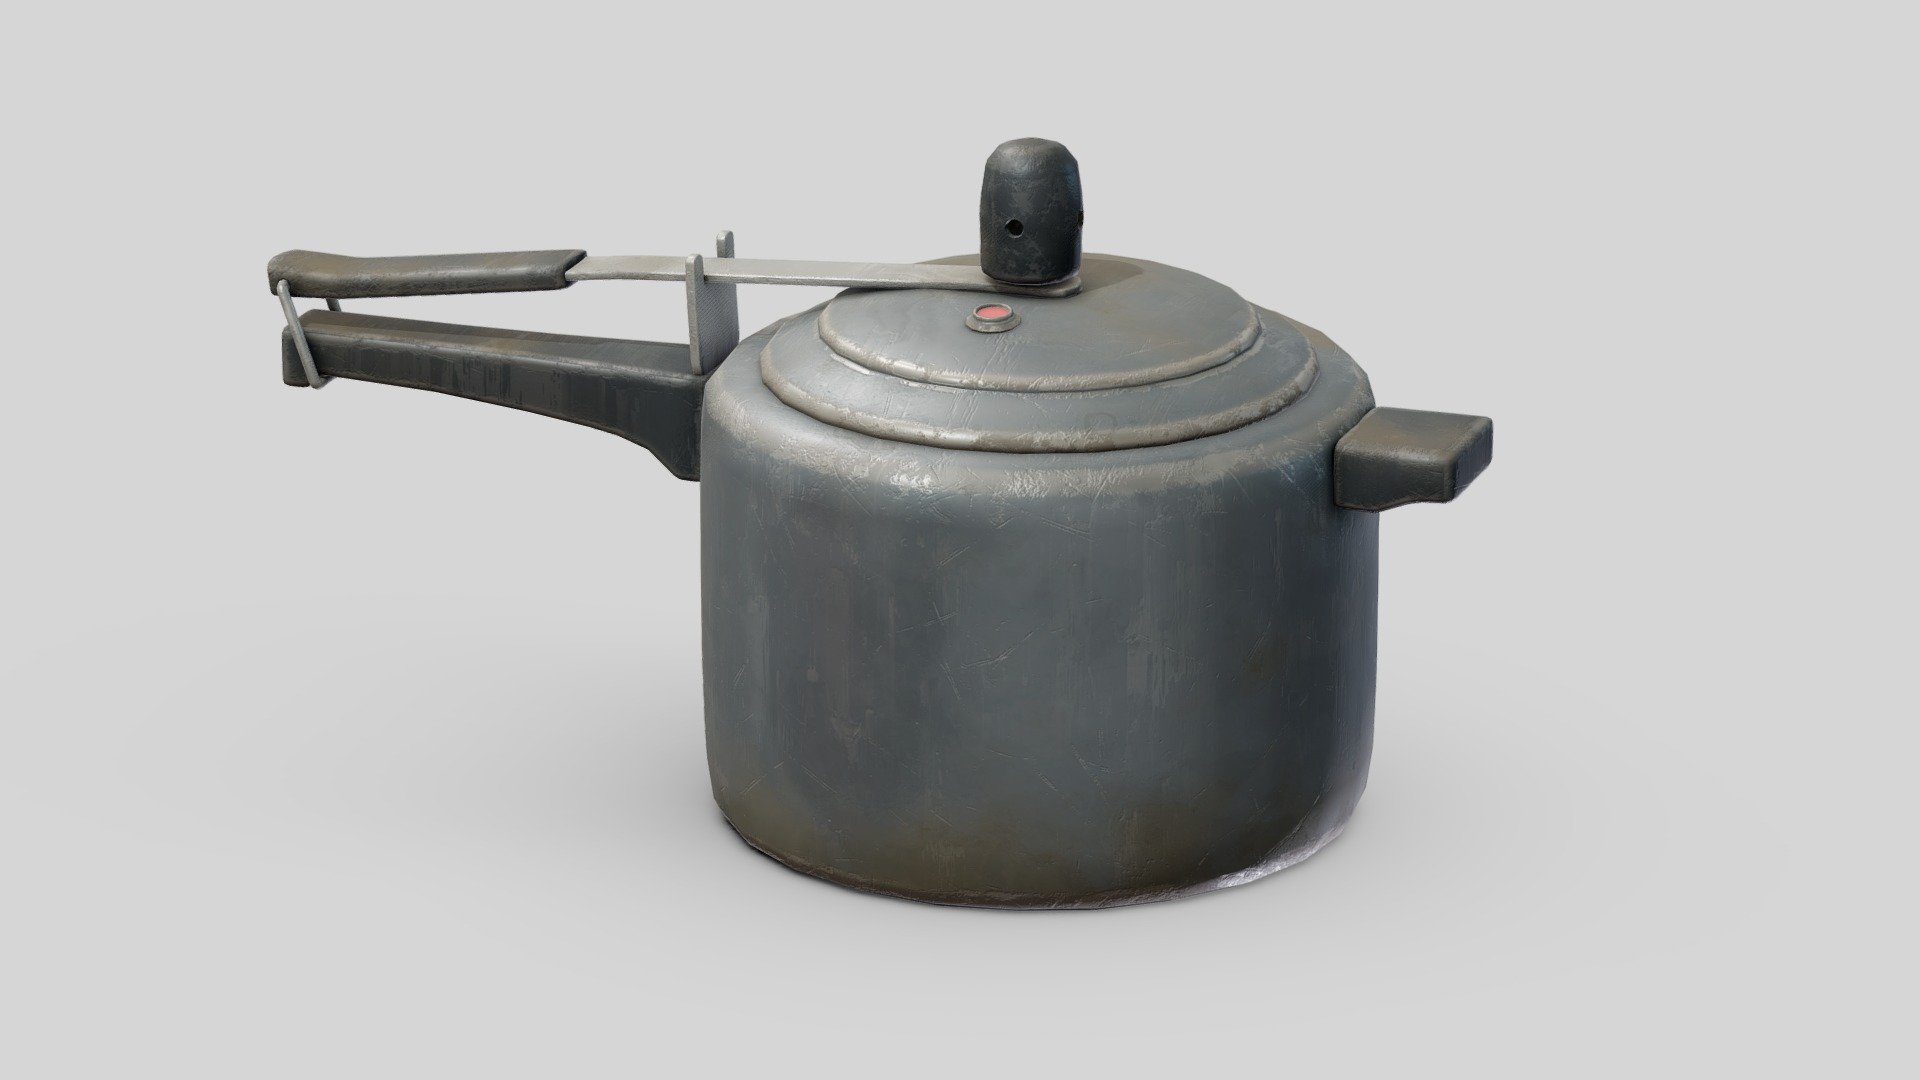 Pressure Cooker for your renders and games

Textures:

Diffuse color, Roughness, Metallic, Normal

All textures are 4K

Files Formats:

Blend

Fbx

Obj - Pressure Cooker - Buy Royalty Free 3D model by Vanessa Araújo (@vanessa3d) 3d model